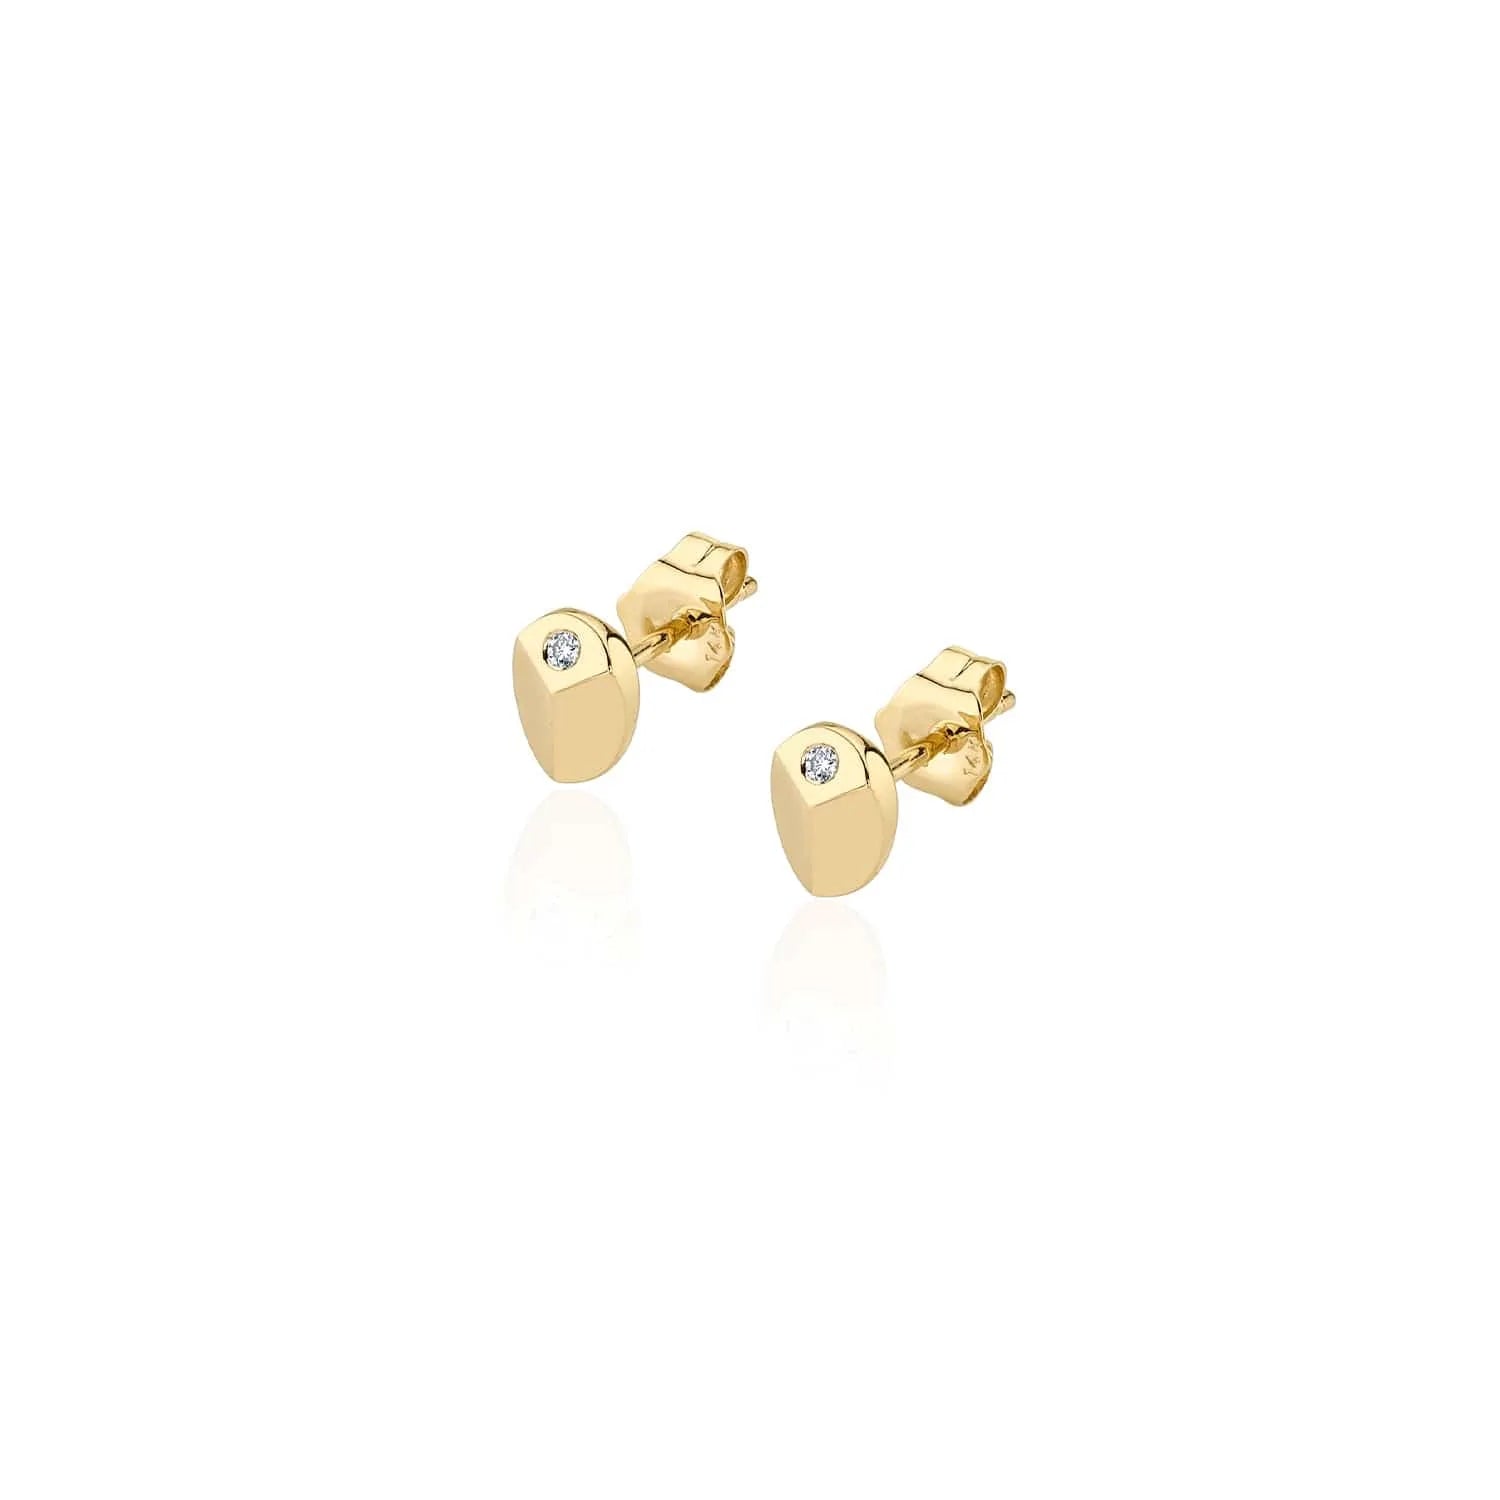 MICHAEL M Earrings 14K Yellow Gold Carve Stud with Diamonds Yellow Gold ER451YG